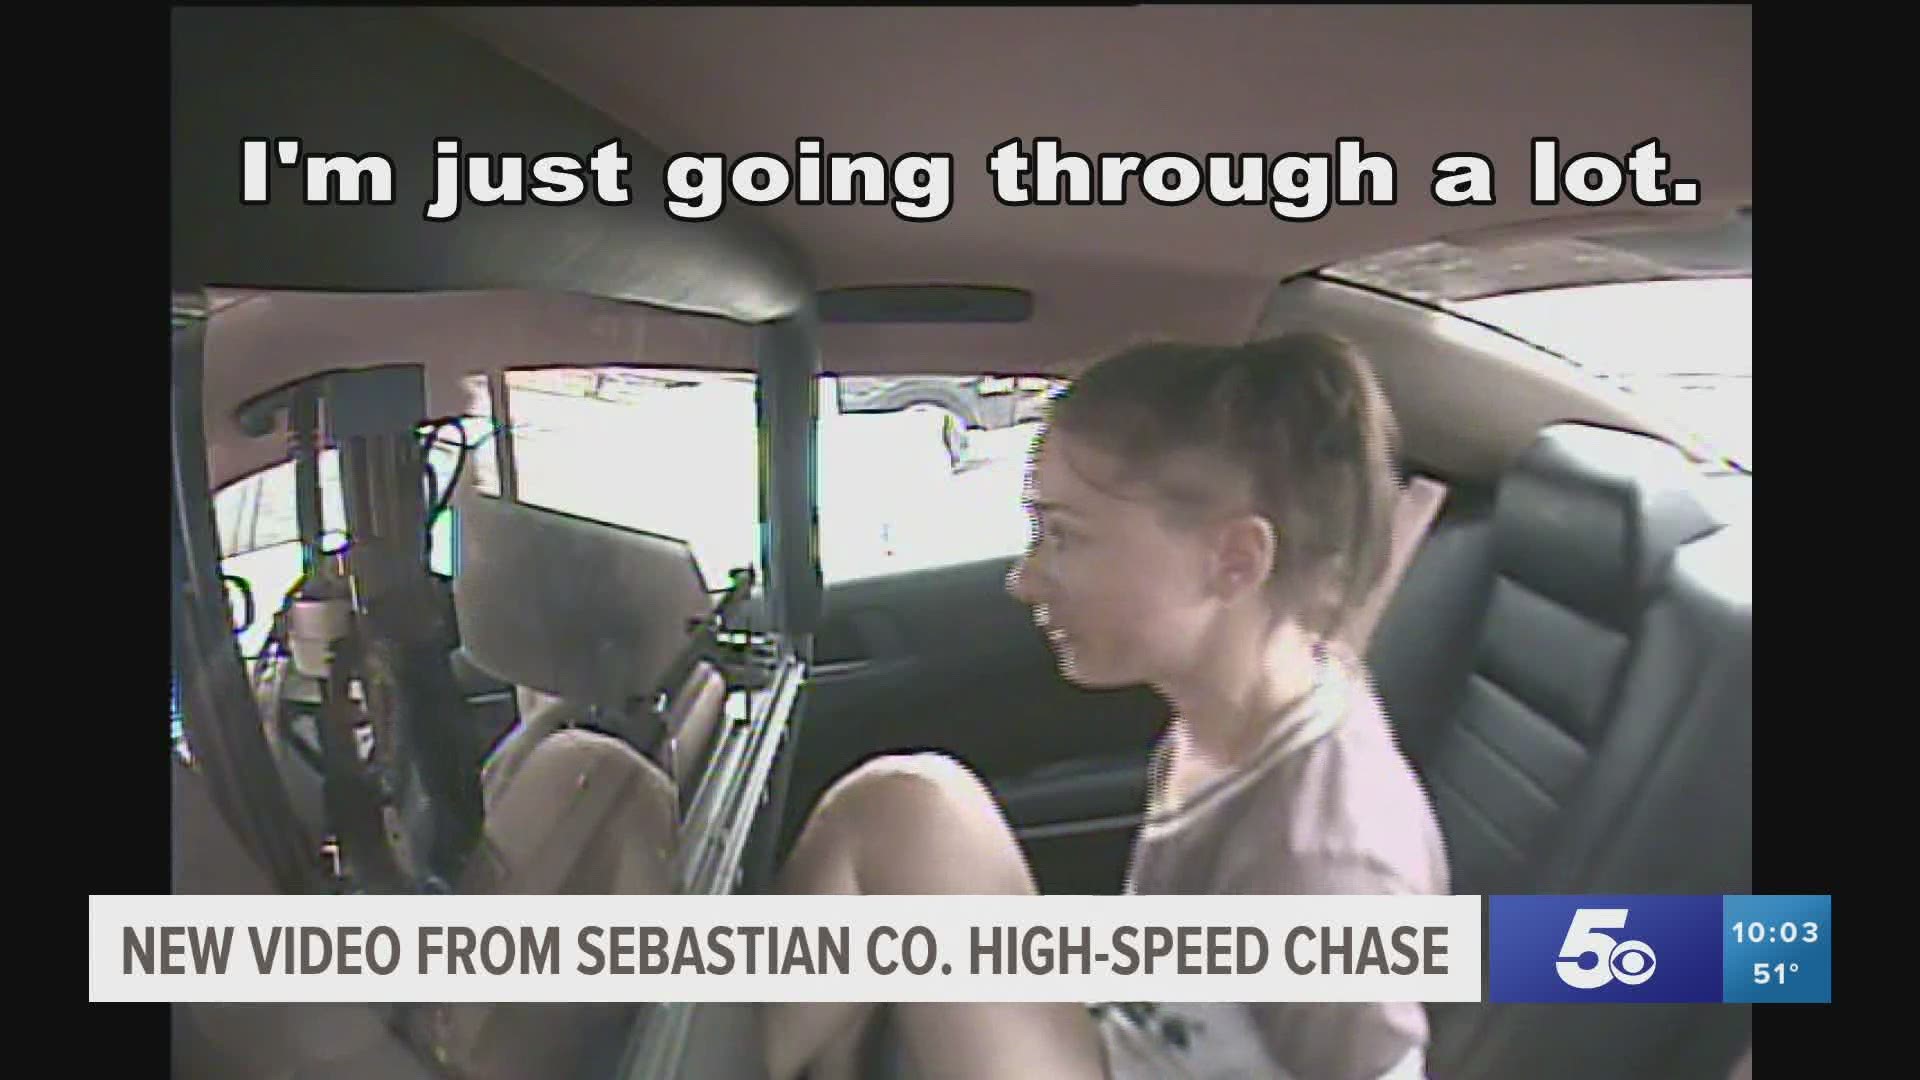 New video has been released from a police chase in Sebastian County showing the woman's arrest.